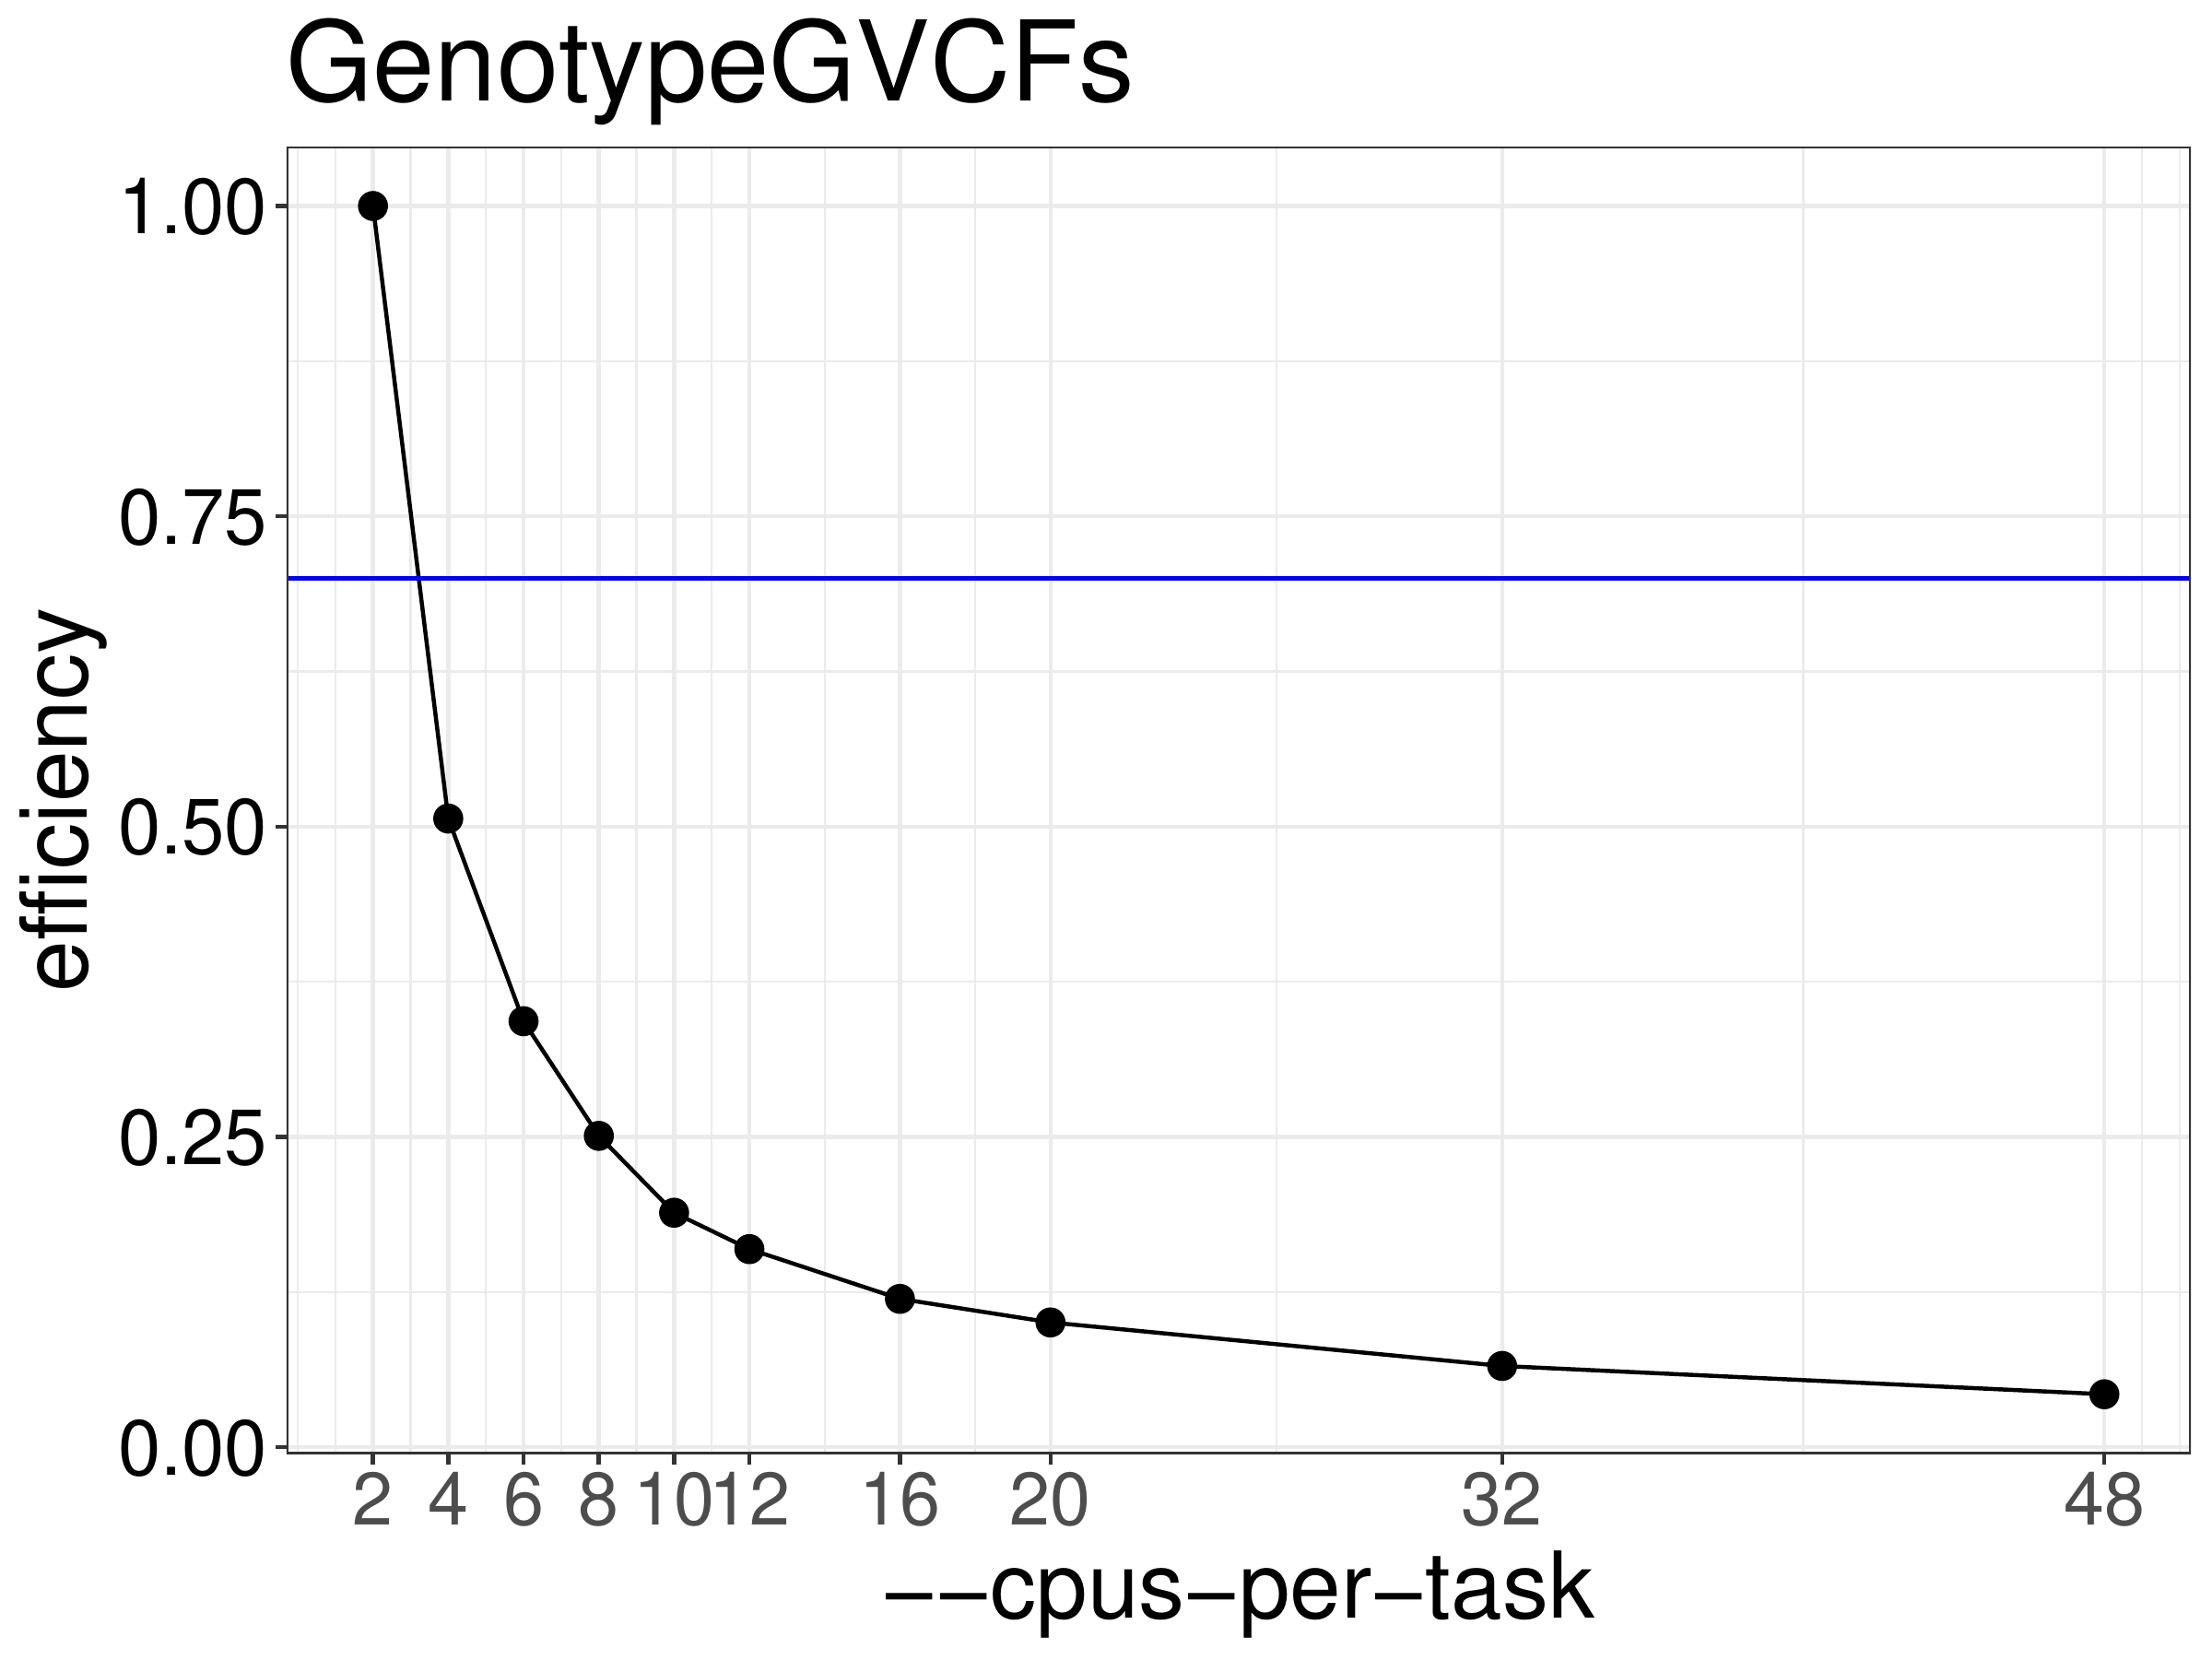 Efficiency of GenotypeGVCFs as a function of the number of threads